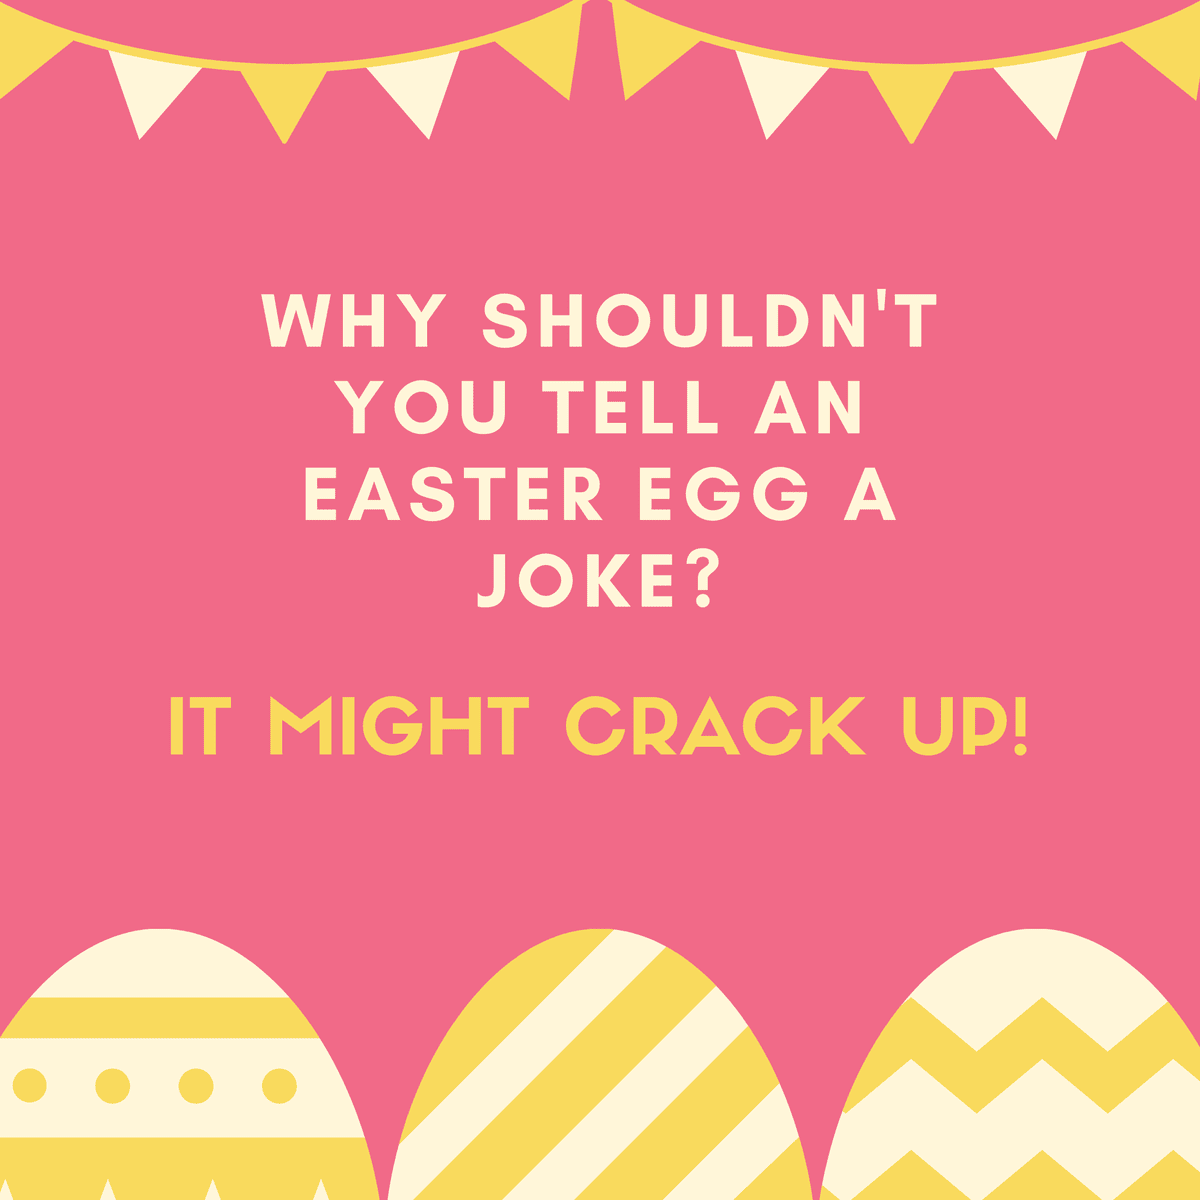 Why shouldn't you tell an Easter egg a joke? It might crack up!